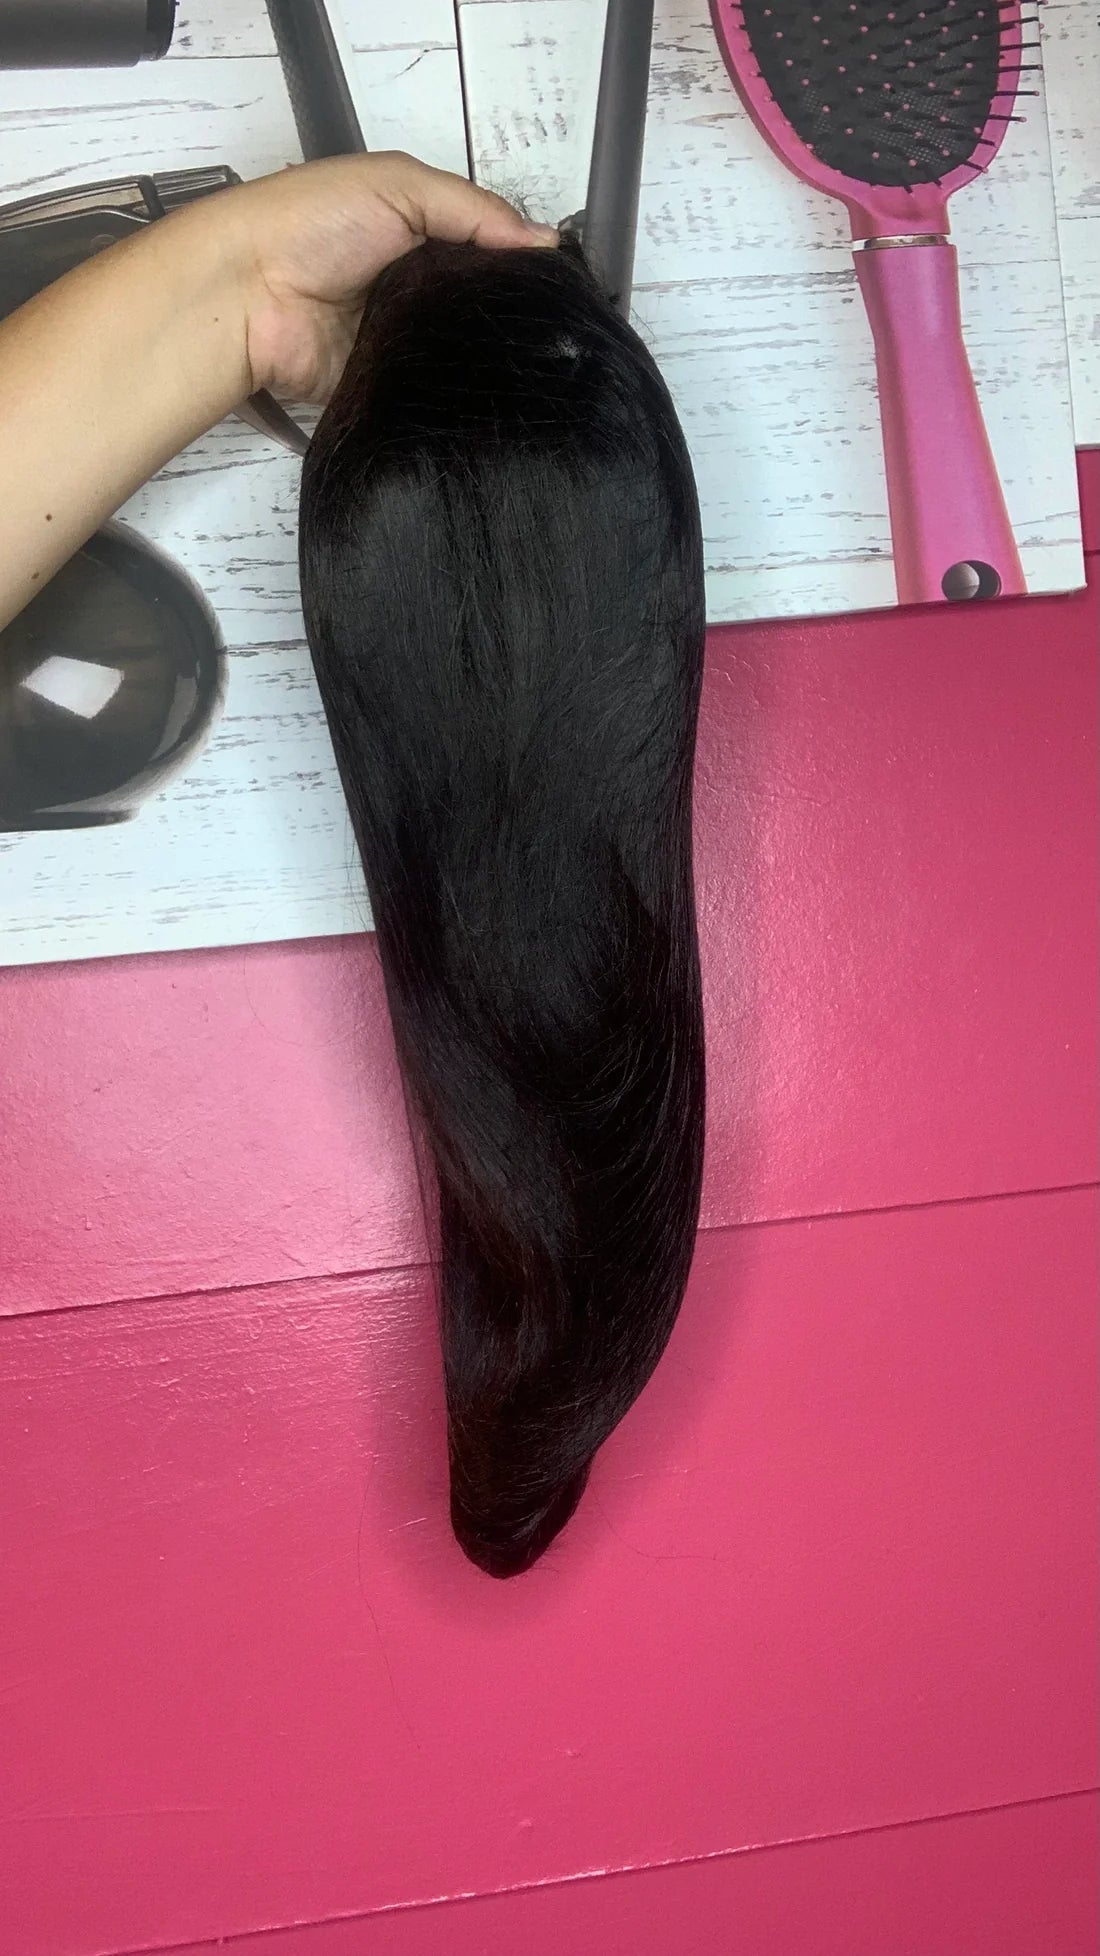 13x4 HD Lace Frontal Wig 18” Straight